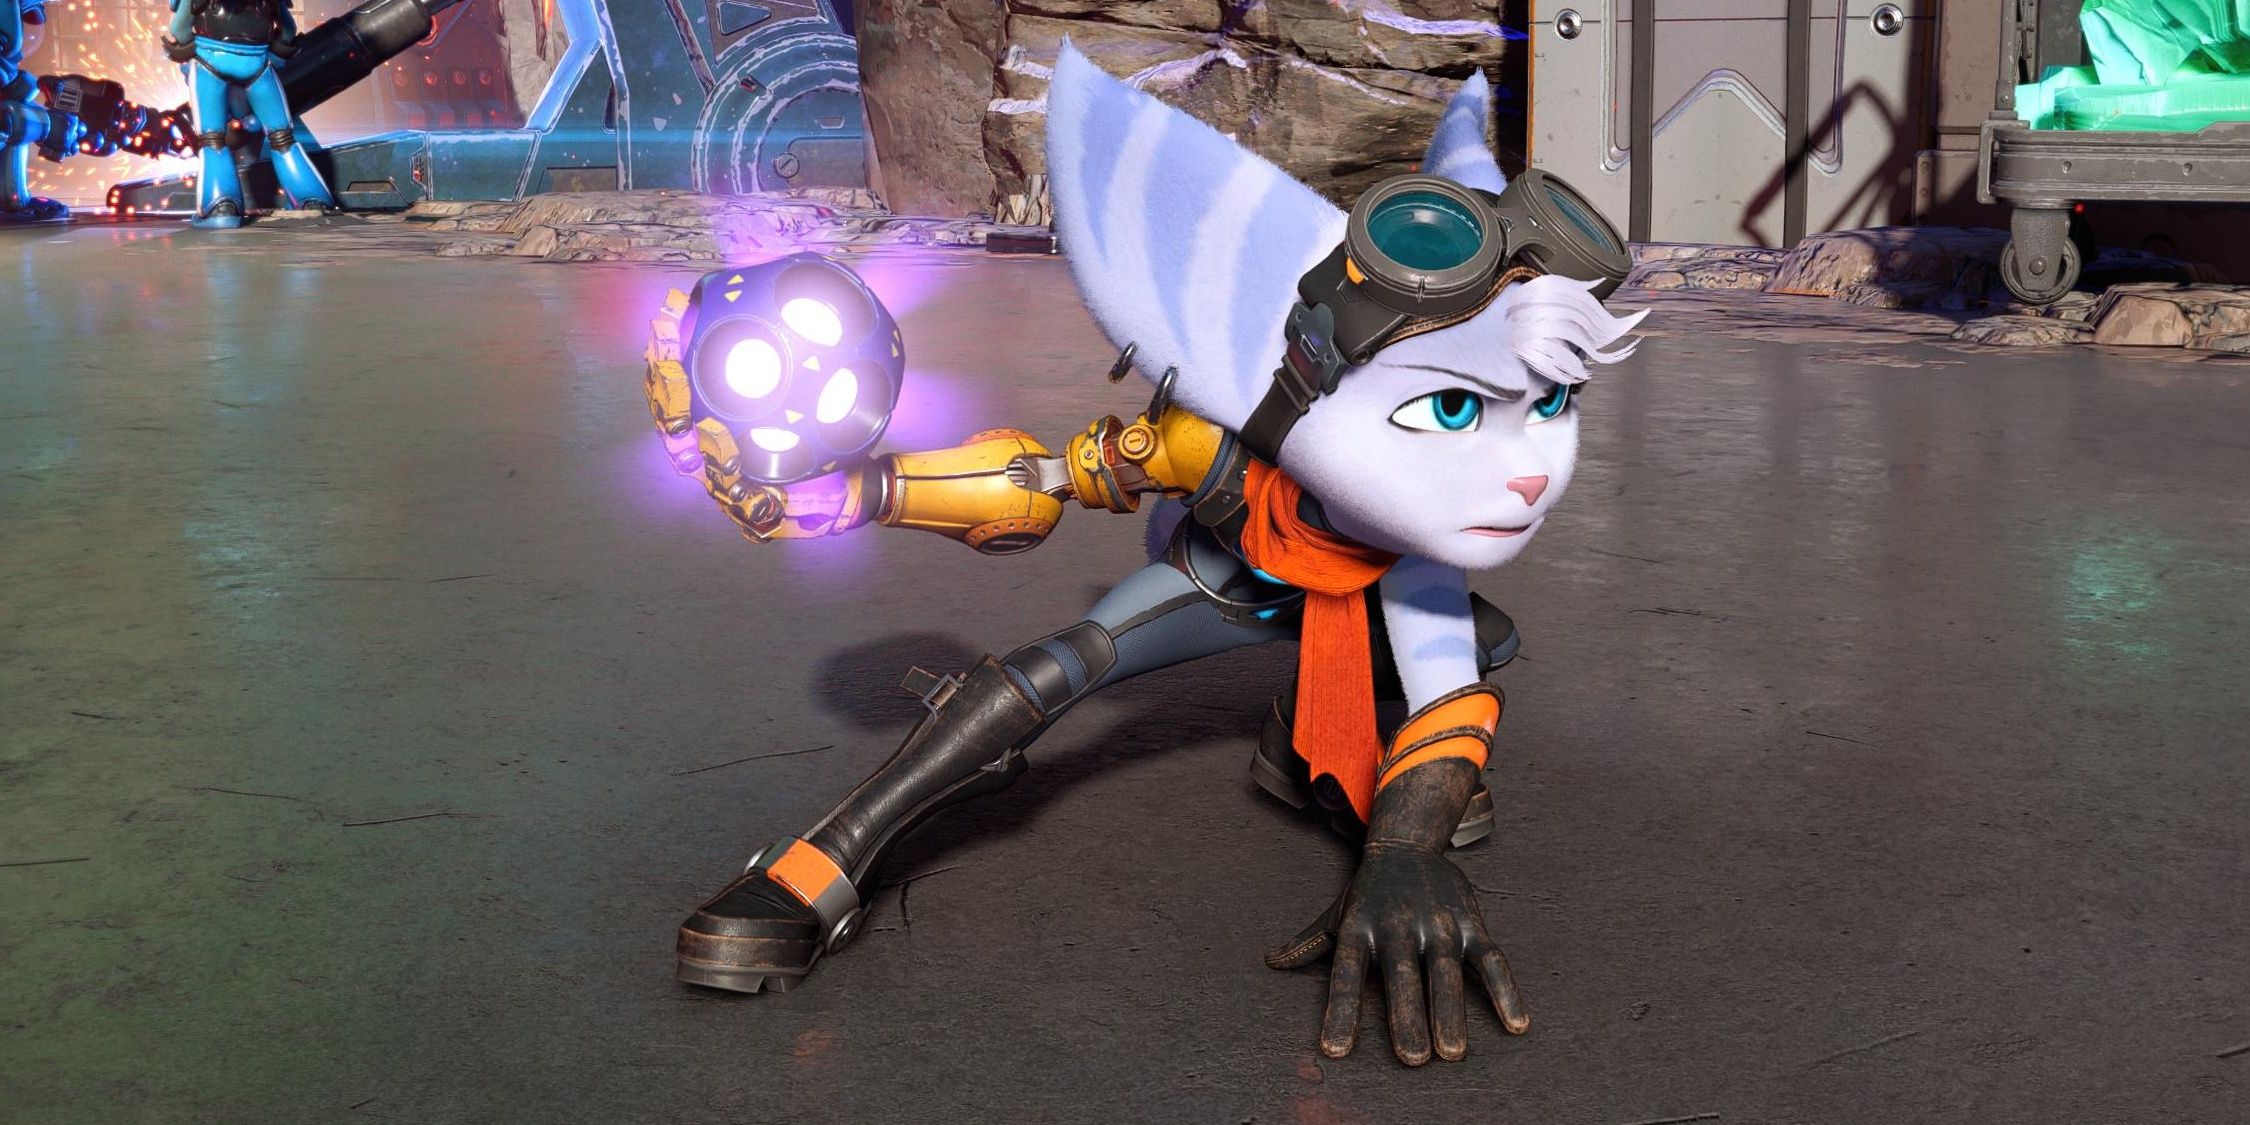 Rivet holding a Shatterbomb grenade in her hand while crouching in Ratchet and Clank: Rift Apart